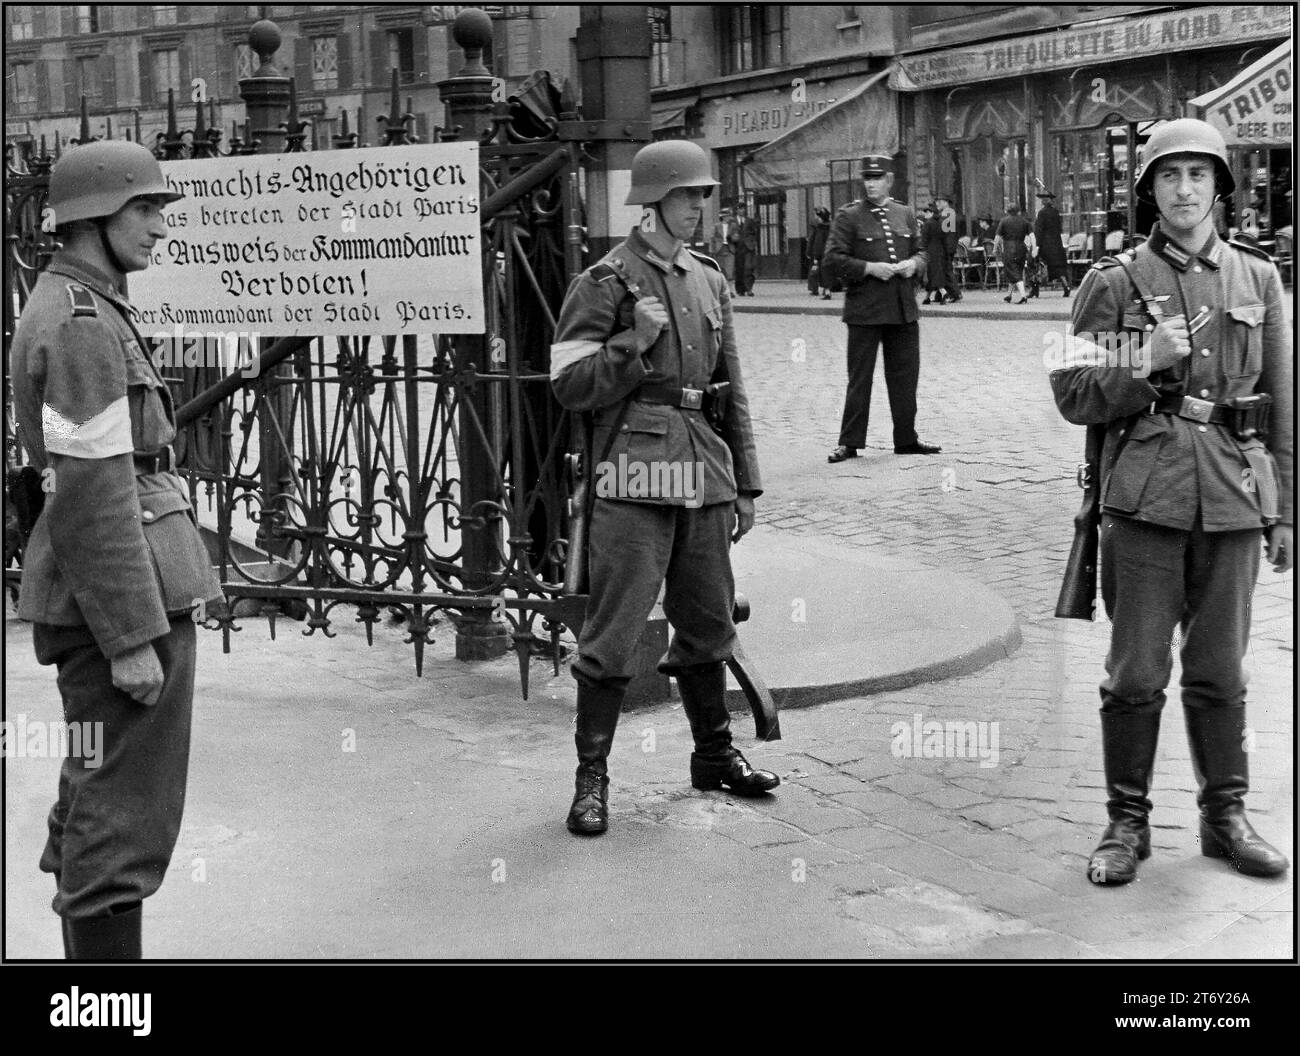 WW2 PARIS OCCUPATION by Nazi Germany. 1940s Wehrmacht soldiers stand guard at Nazi Commandant Office Paris with French Policeman behind. Sign reads Wehrmacht Members entering the city of Paris Identification from the commandants office. FORBIDDEN ! Occupied Paris France 1940s World War II WW2 Second World War Stock Photo